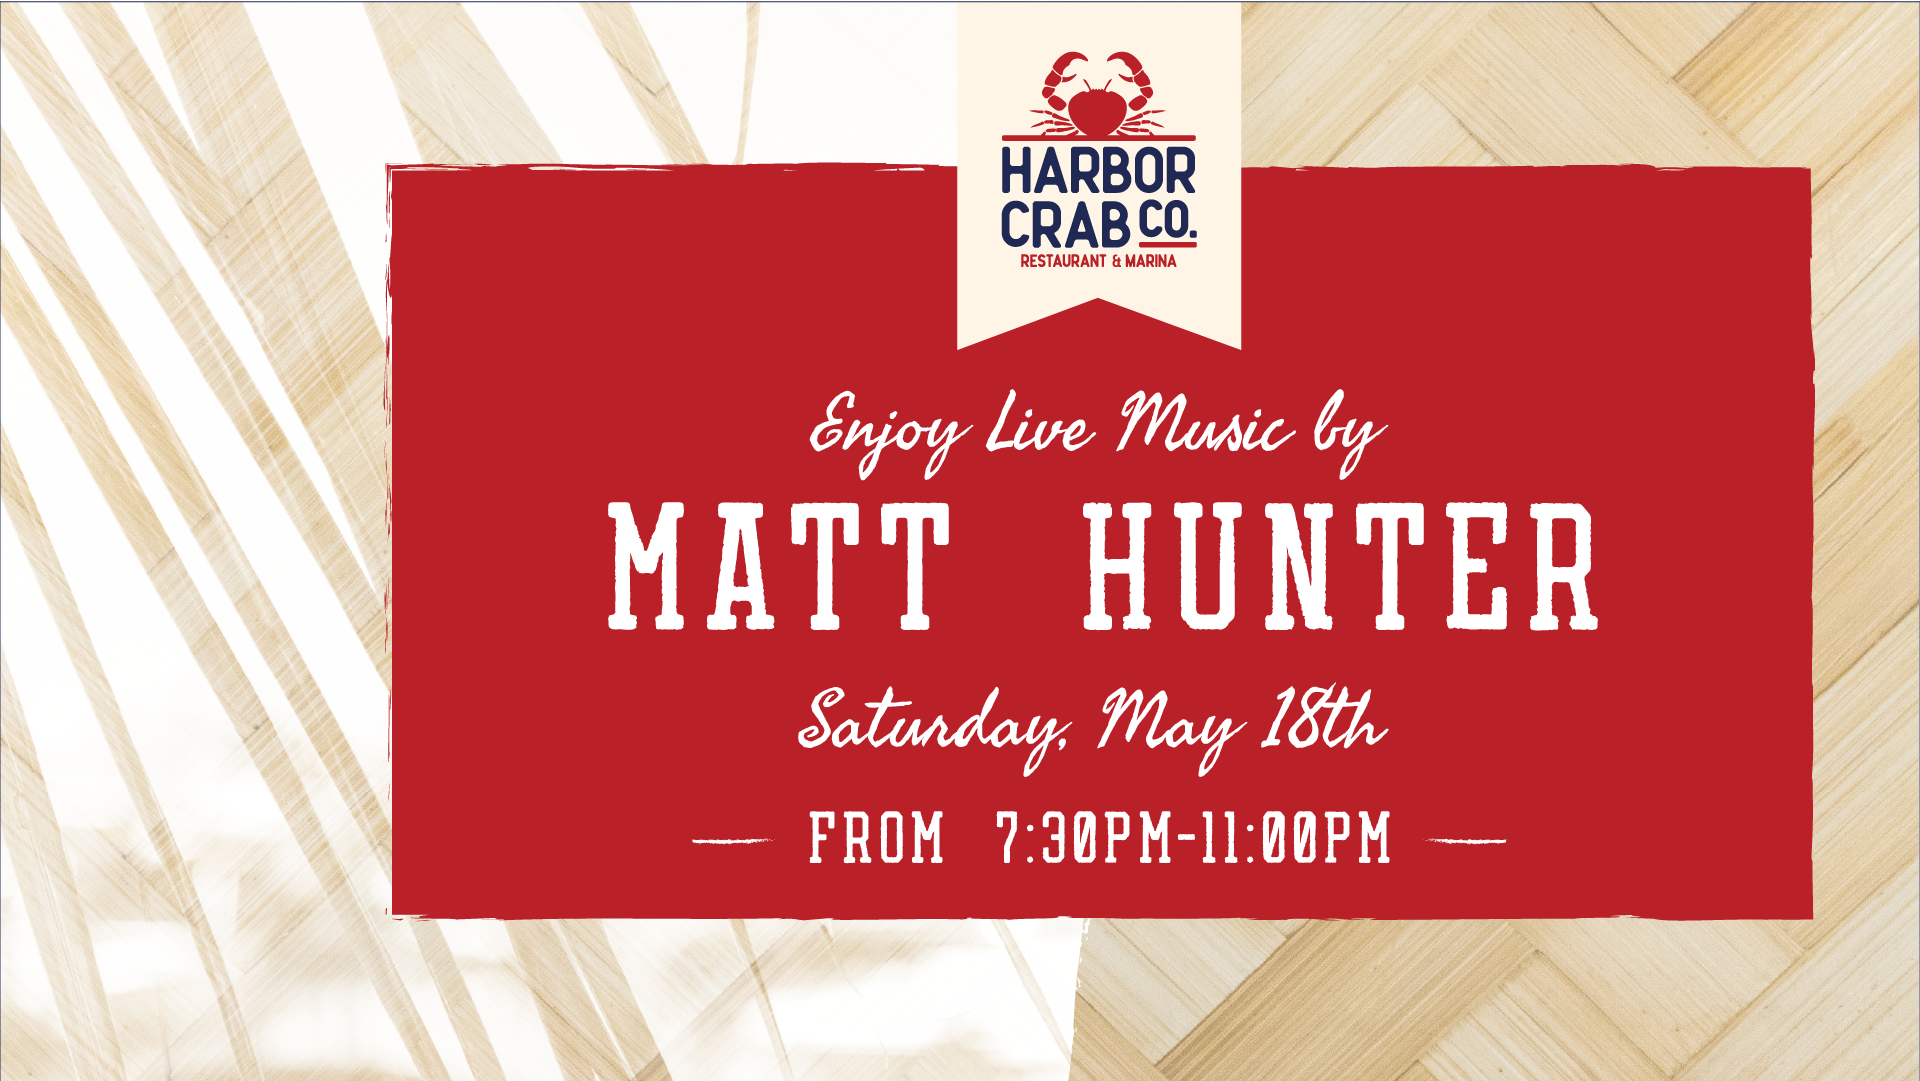 Live music by Matt Hunter at Harbor Crab on May 18, from 7:30 pm to 11:00 pm.